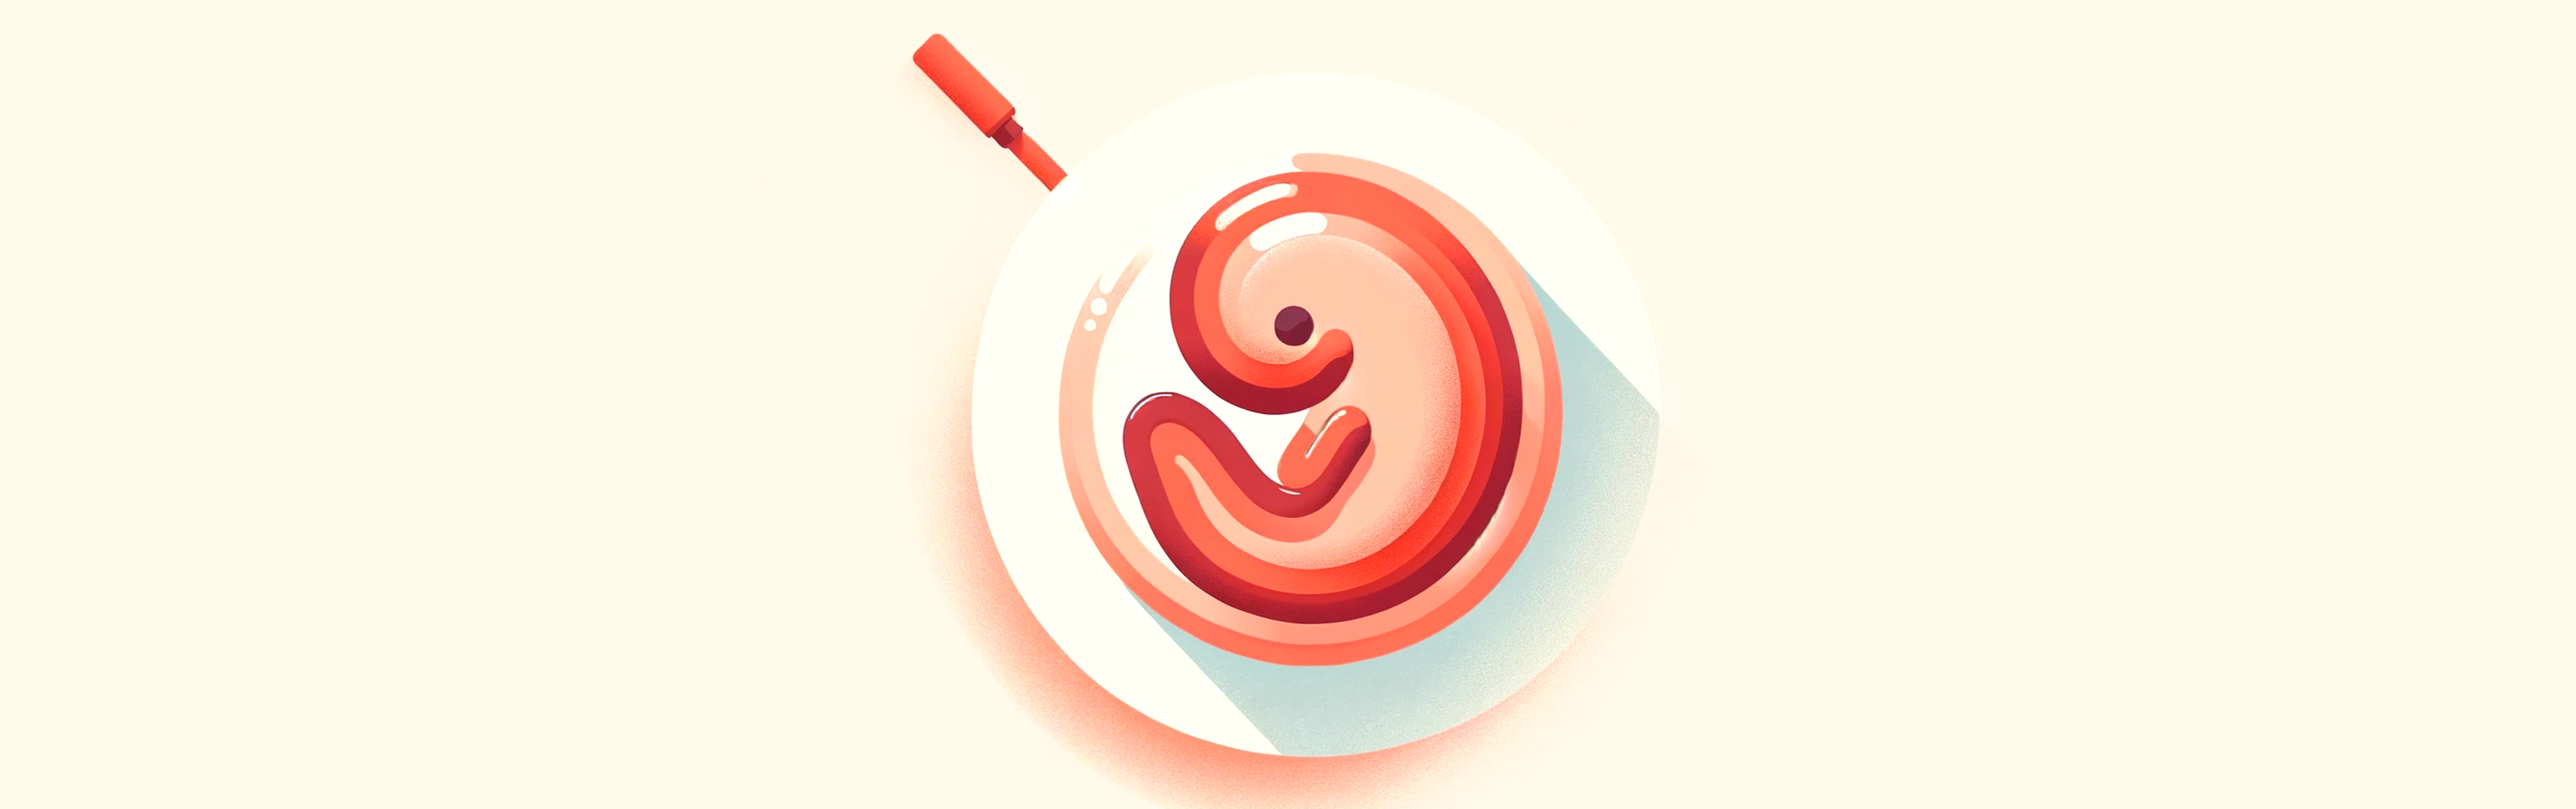 Minimalist flat design illustration of a 6-week fetus resembling a small tadpole next to a large yolk sac, representing an ultrasound image for a private early pregnancy scan at the specialist London Pregnancy Clinic, capturing the essence of a 6 weeks pregnant ultrasound.